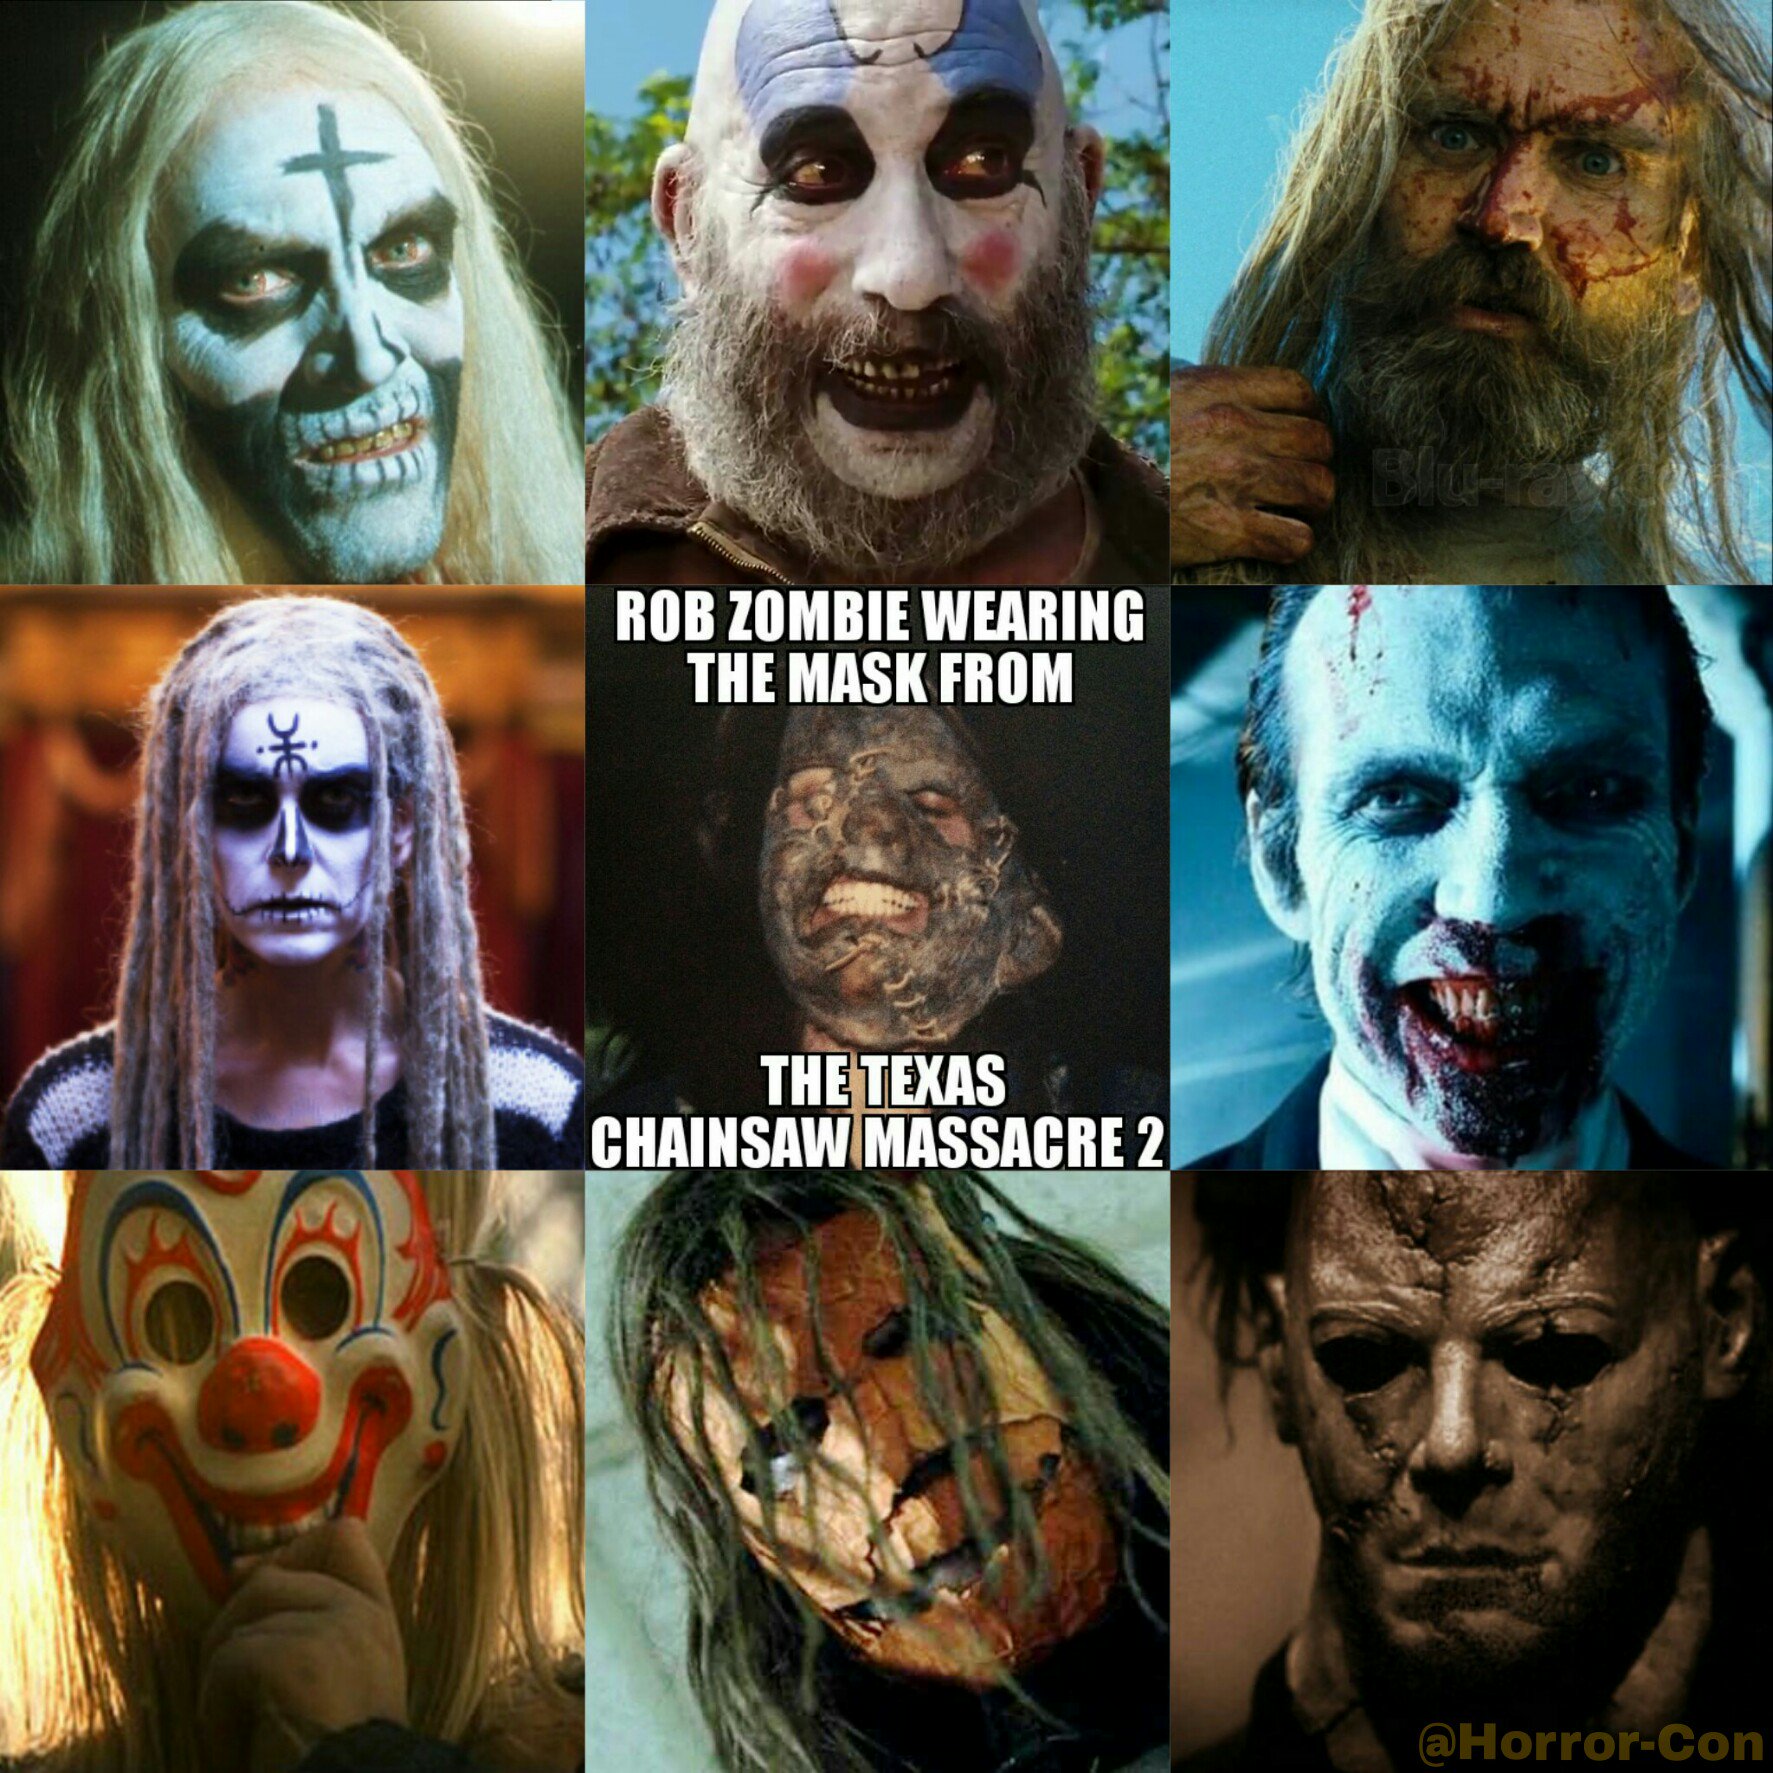 Happy Birthday, Rob Z. Musician and Horror Director Rob Zombie celebrities his 52nd birthday today. 